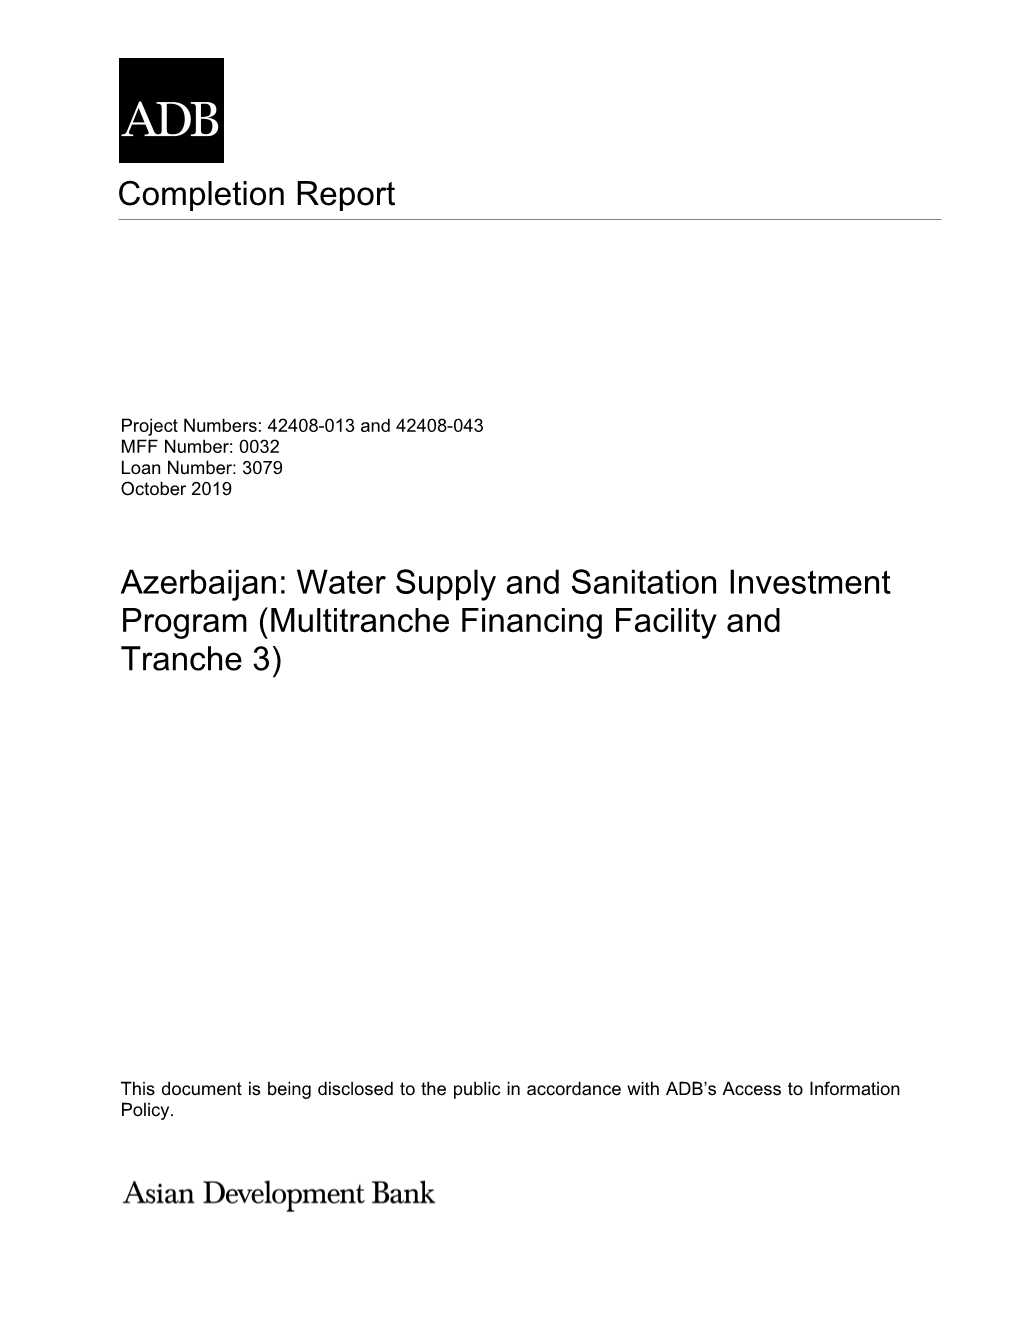 Completion Report Azerbaijan: Water Supply